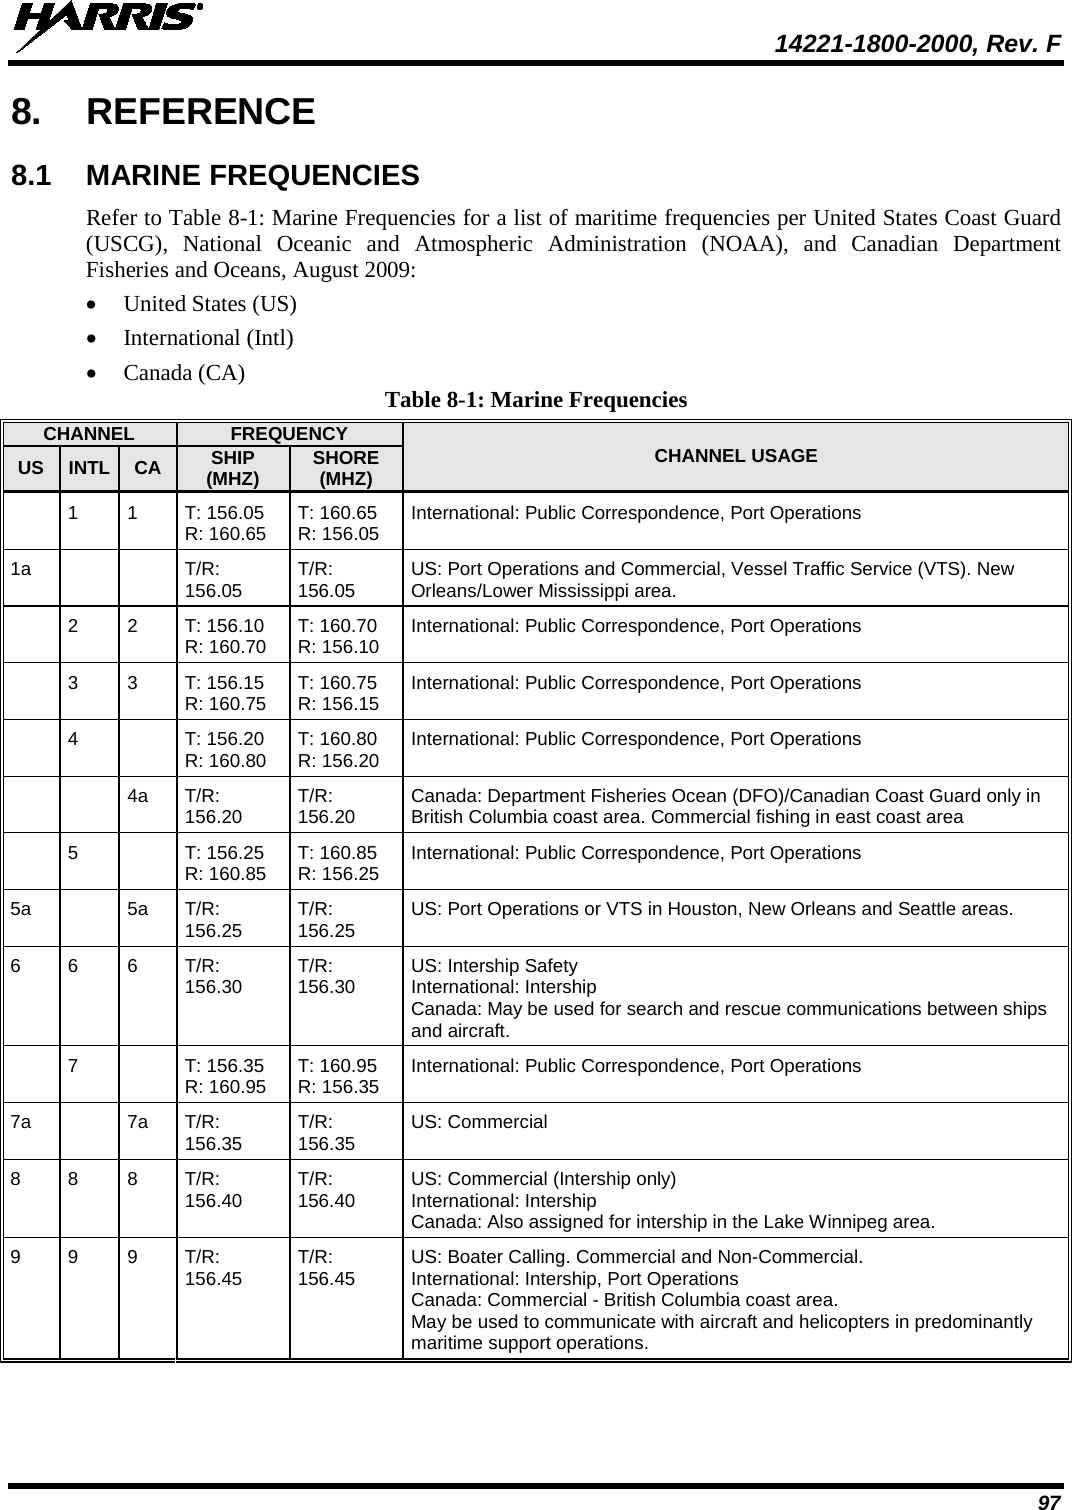  14221-1800-2000, Rev. F 97 8. REFERENCE 8.1 MARINE FREQUENCIES Refer to Table 8-1: Marine Frequencies for a list of maritime frequencies per United States Coast Guard (USCG), National Oceanic and Atmospheric Administration (NOAA), and Canadian Department Fisheries and Oceans, August 2009: • United States (US) • International (Intl) • Canada (CA) Table 8-1: Marine Frequencies CHANNEL FREQUENCY CHANNEL USAGE US INTL CA SHIP (MHZ) SHORE (MHZ)  1 1 T: 156.05 R: 160.65 T: 160.65 R: 156.05 International: Public Correspondence, Port Operations 1a   T/R: 156.05 T/R: 156.05 US: Port Operations and Commercial, Vessel Traffic Service (VTS). New Orleans/Lower Mississippi area.   2 2 T: 156.10 R: 160.70 T: 160.70  R: 156.10 International: Public Correspondence, Port Operations  3 3 T: 156.15 R: 160.75 T: 160.75 R: 156.15 International: Public Correspondence, Port Operations  4  T: 156.20  R: 160.80 T: 160.80  R: 156.20 International: Public Correspondence, Port Operations   4a T/R: 156.20 T/R: 156.20 Canada: Department Fisheries Ocean (DFO)/Canadian Coast Guard only in British Columbia coast area. Commercial fishing in east coast area  5  T: 156.25  R: 160.85 T: 160.85  R: 156.25 International: Public Correspondence, Port Operations 5a  5a T/R: 156.25 T/R: 156.25 US: Port Operations or VTS in Houston, New Orleans and Seattle areas. 6 6 6 T/R: 156.30 T/R: 156.30 US: Intership Safety International: Intership Canada: May be used for search and rescue communications between ships and aircraft.  7  T: 156.35  R: 160.95 T: 160.95  R: 156.35 International: Public Correspondence, Port Operations 7a  7a T/R: 156.35 T/R: 156.35 US: Commercial 8 8 8 T/R: 156.40 T/R: 156.40 US: Commercial (Intership only) International: Intership Canada: Also assigned for intership in the Lake Winnipeg area. 9 9 9 T/R: 156.45 T/R: 156.45 US: Boater Calling. Commercial and Non-Commercial. International: Intership, Port Operations Canada: Commercial - British Columbia coast area. May be used to communicate with aircraft and helicopters in predominantly maritime support operations. 